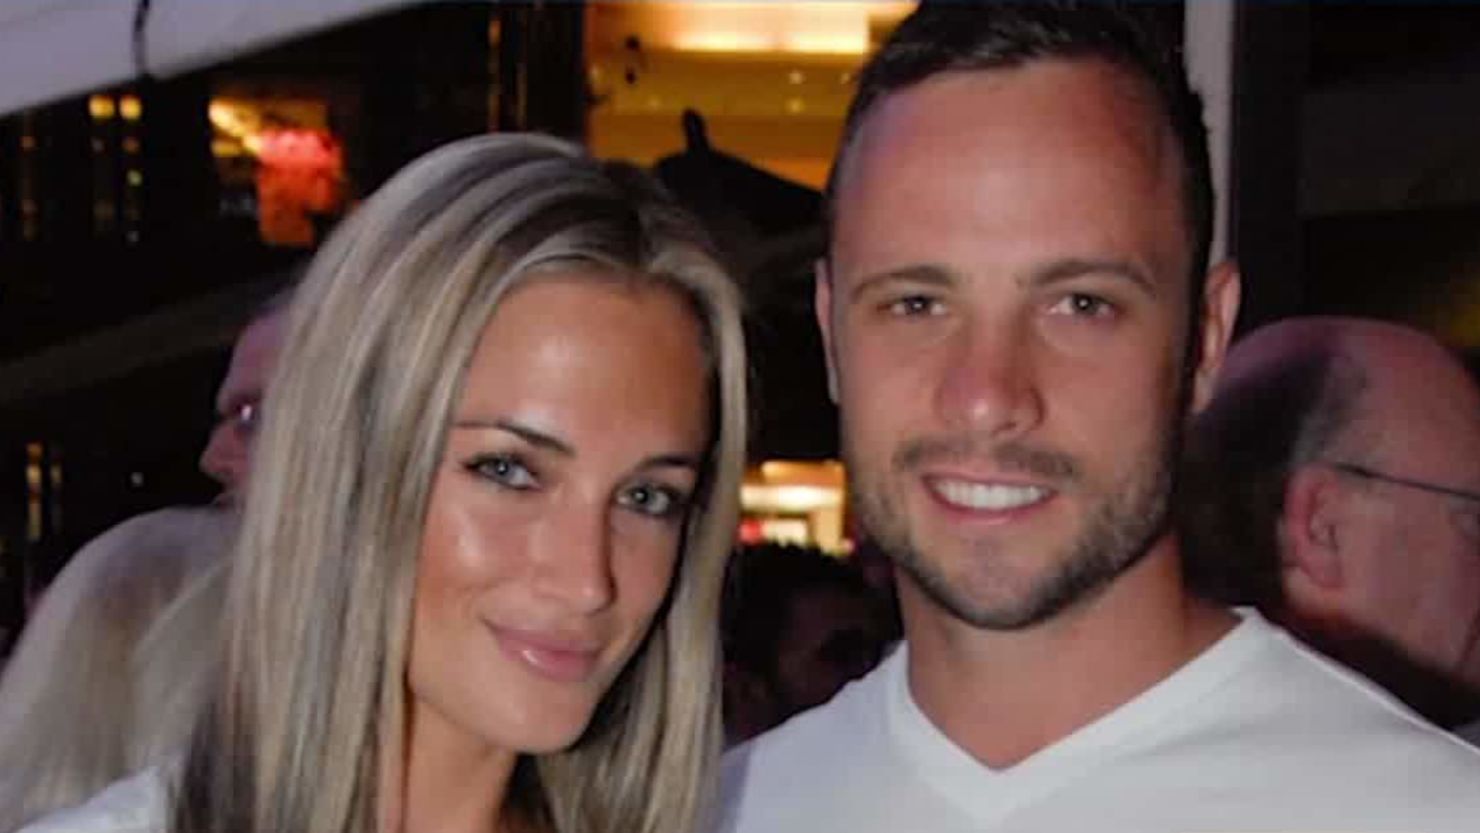 Oscar Pistorius was found guilty late last year of murder in the 2013 death of Reeva Steenkamp, with a judge overturning his conviction of culpable homicide